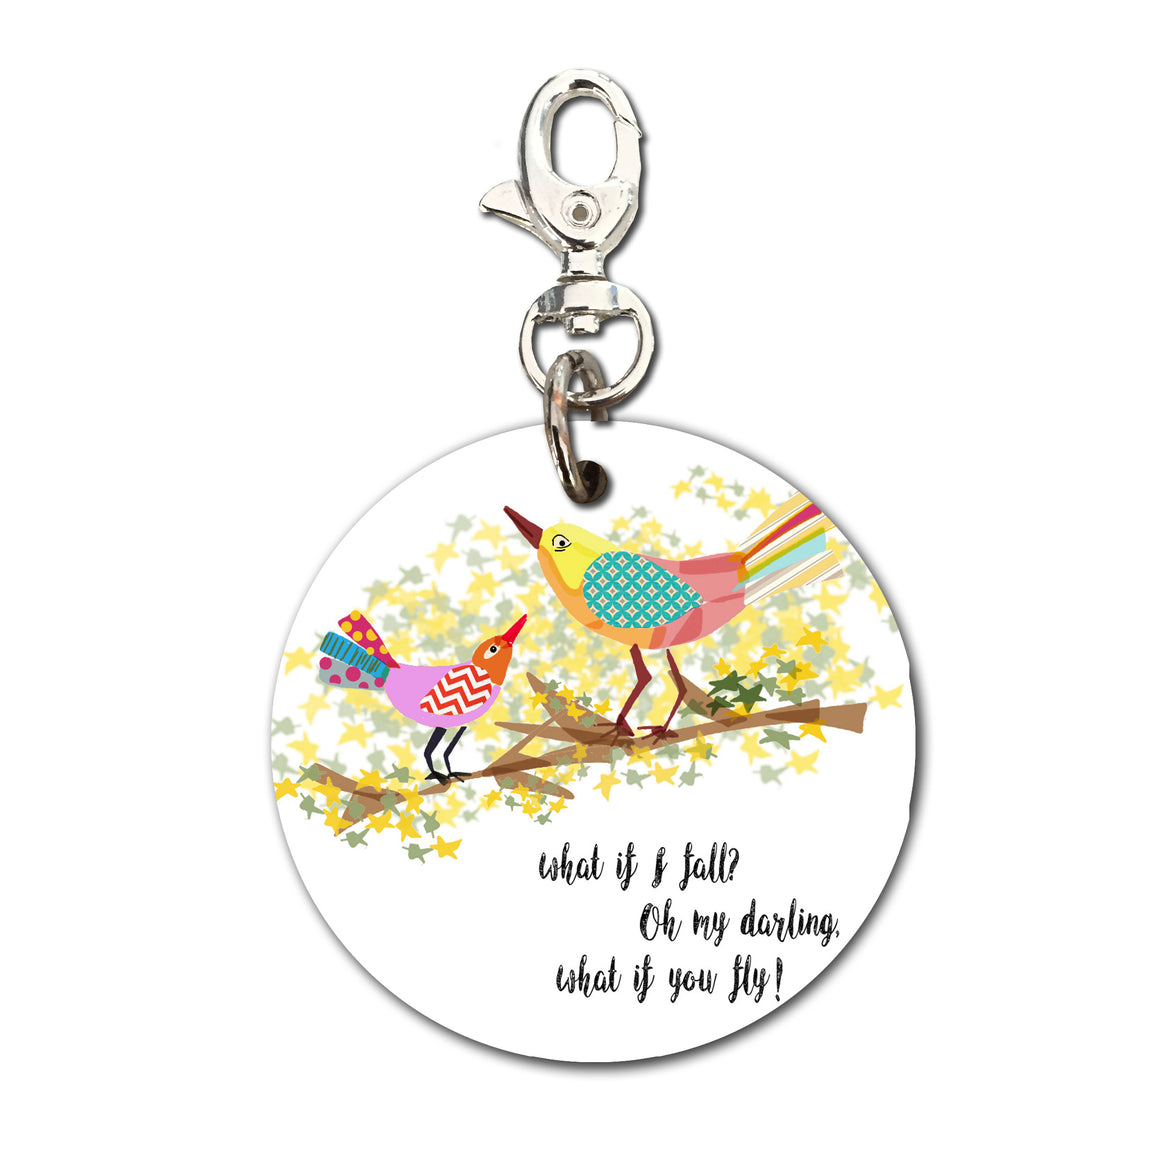 Keyring (Circular) - Quote What if you fly